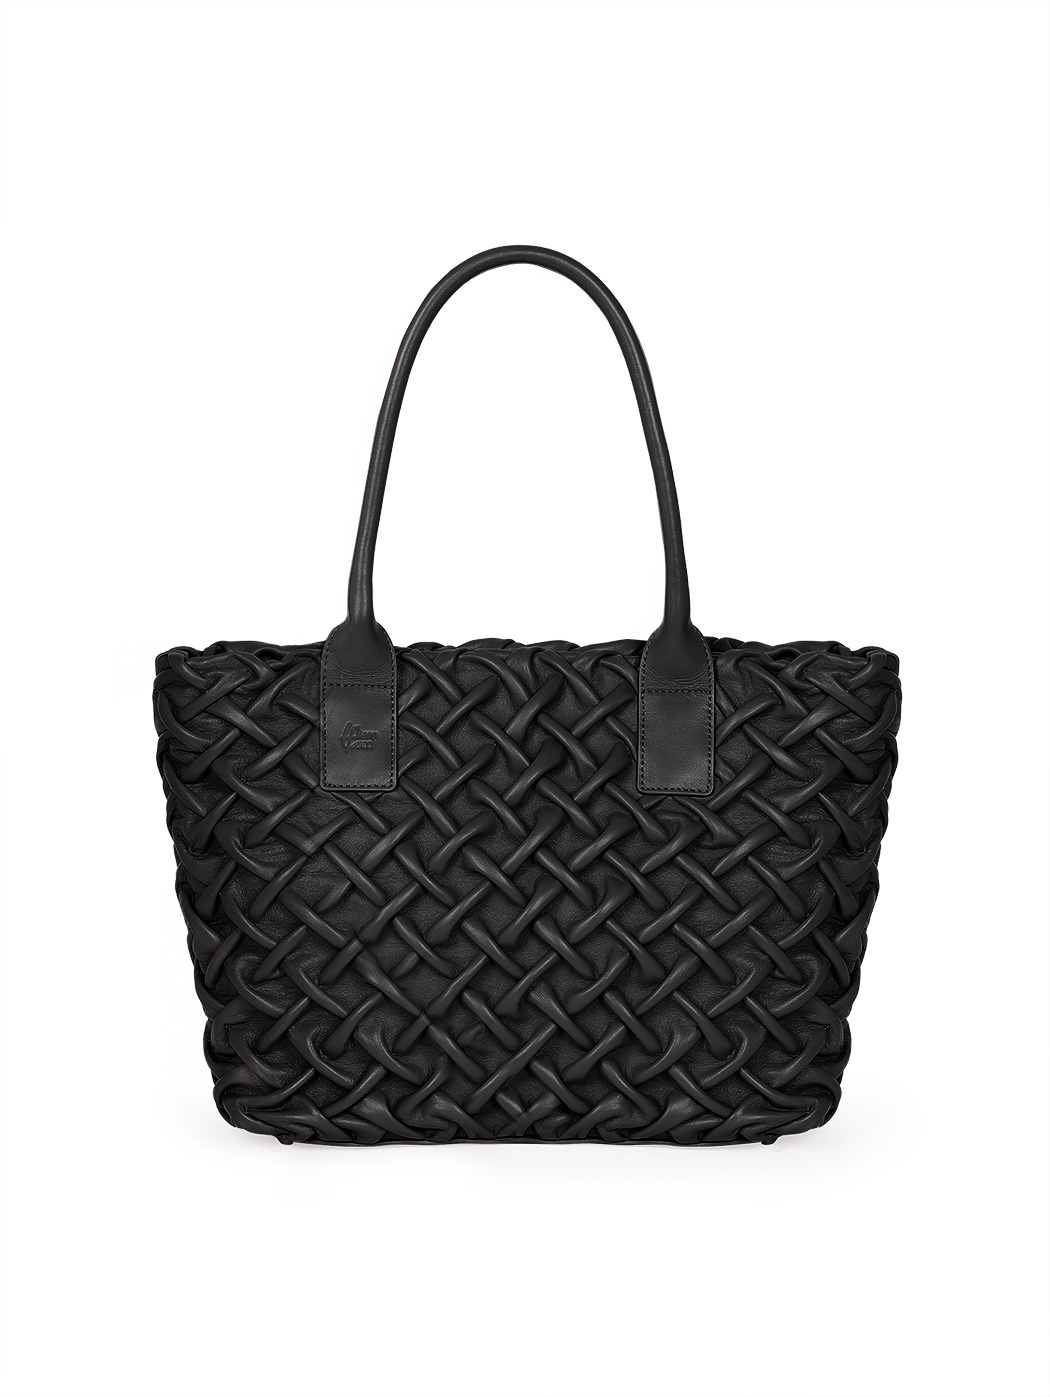 Quilted Weave Leather Satchel Tote Bag Black